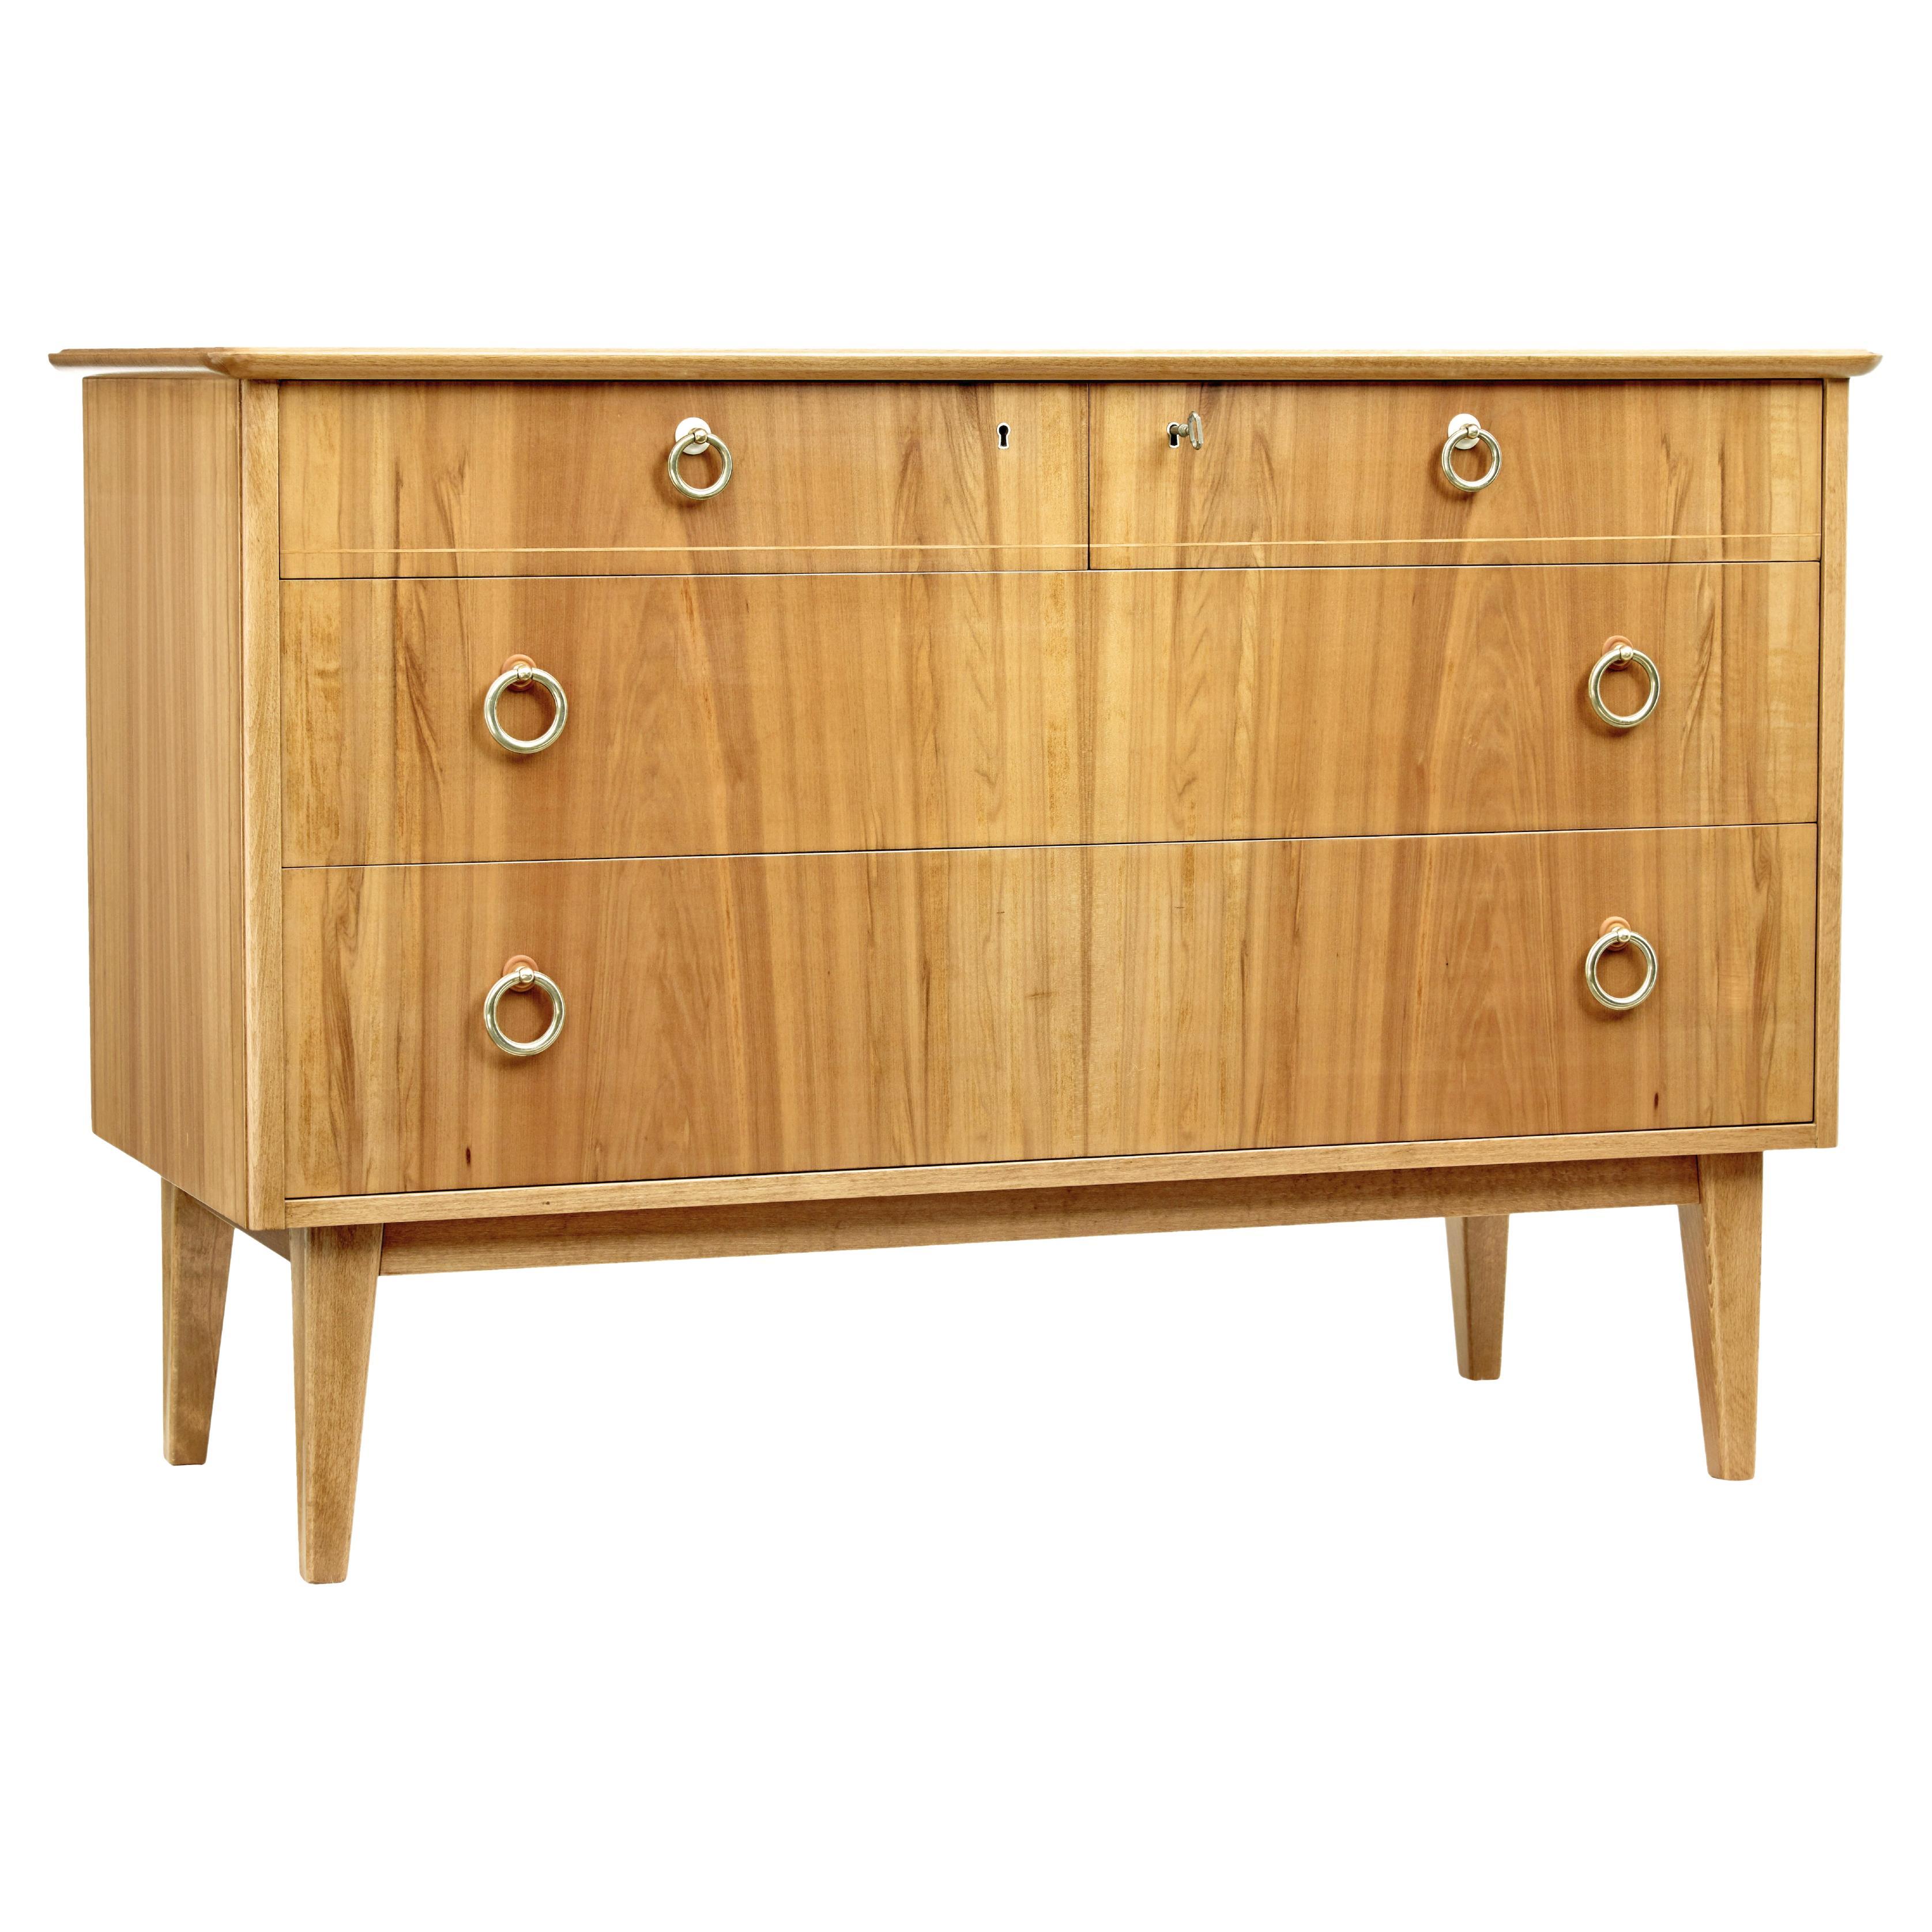 Mid-20th Century Swedish Walnut Chest of Drawers by Bodafors